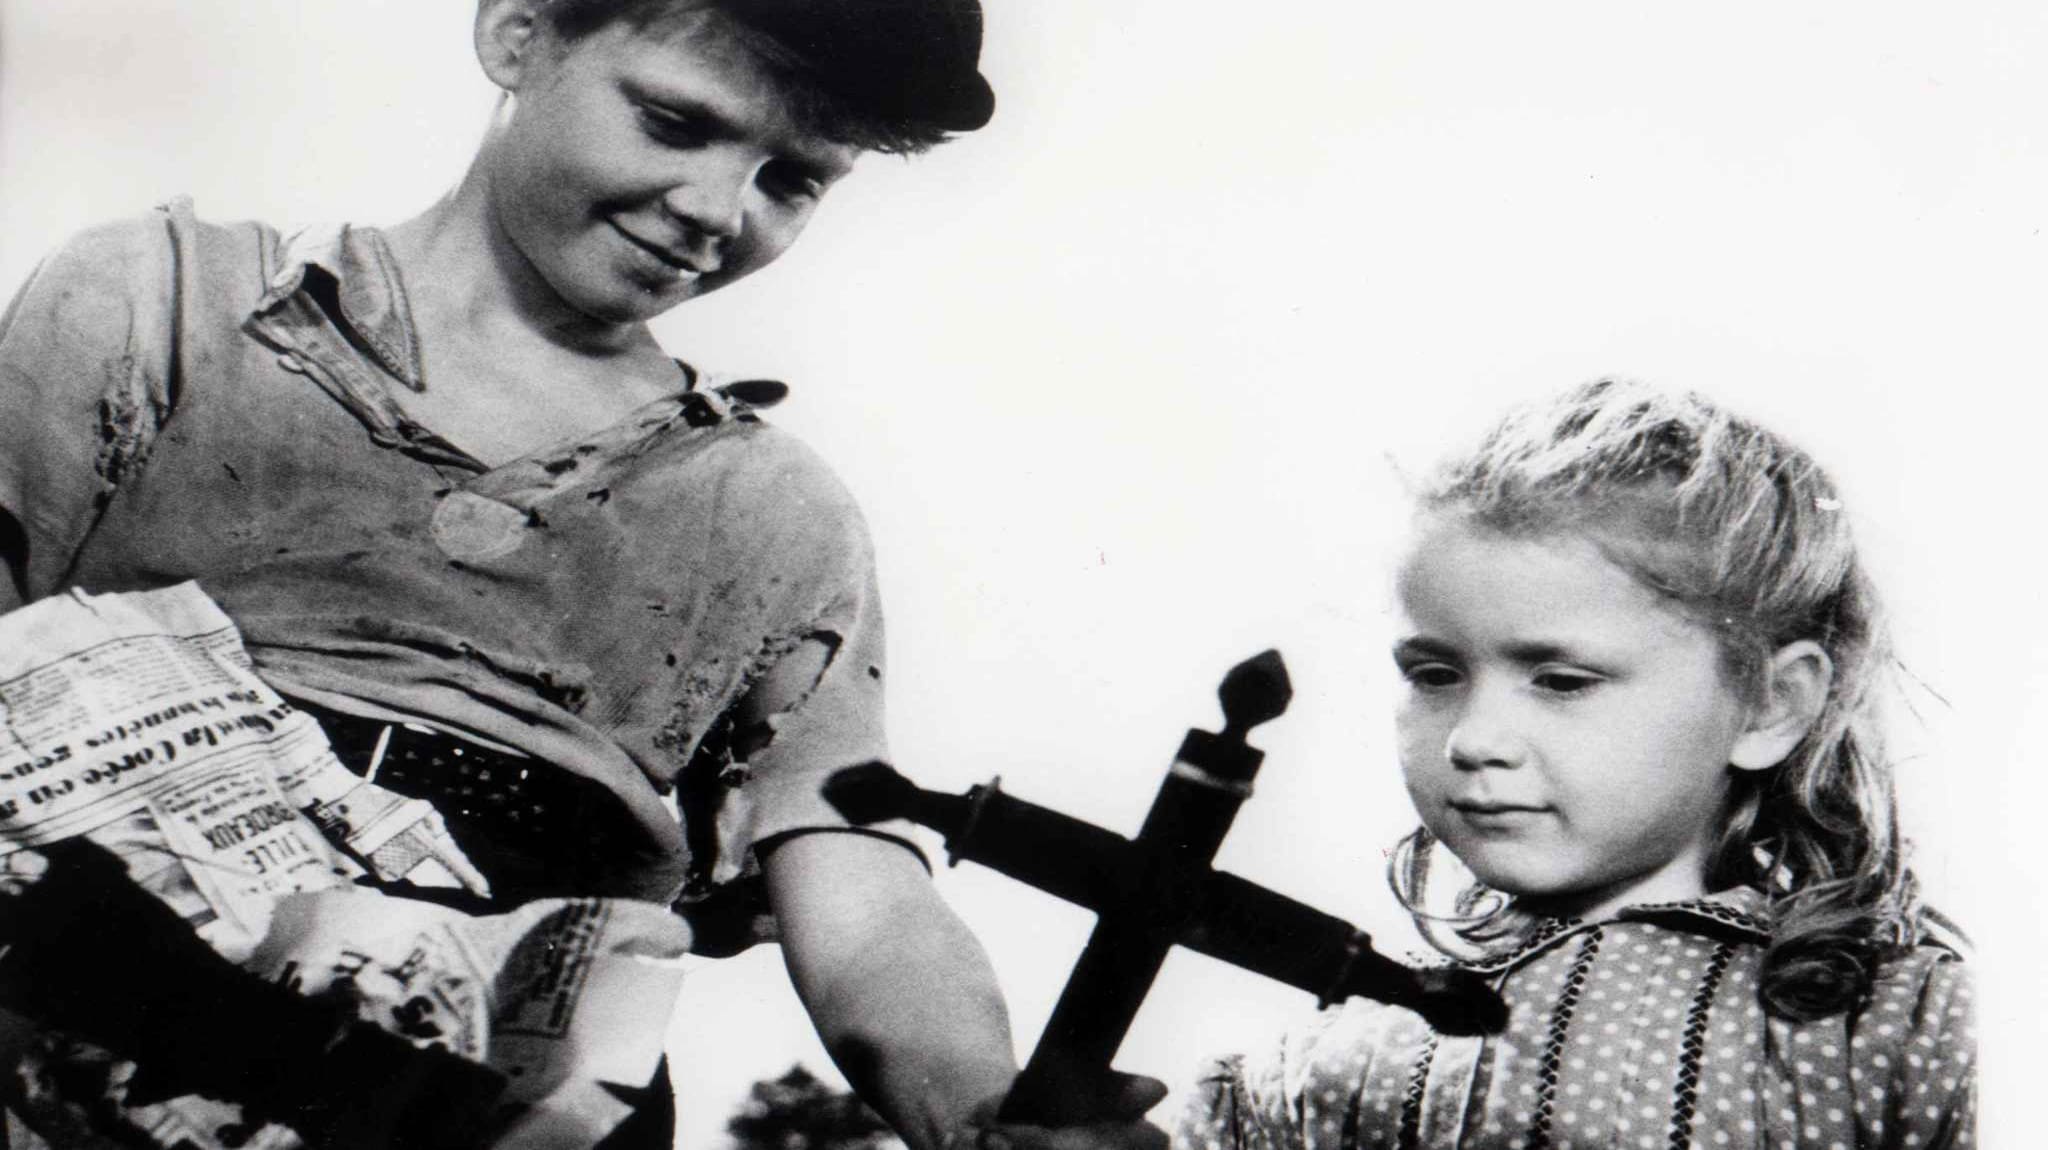 Michel and Brigitte discover a cross to take for their cemetery in the 1952 film Forbidden Games